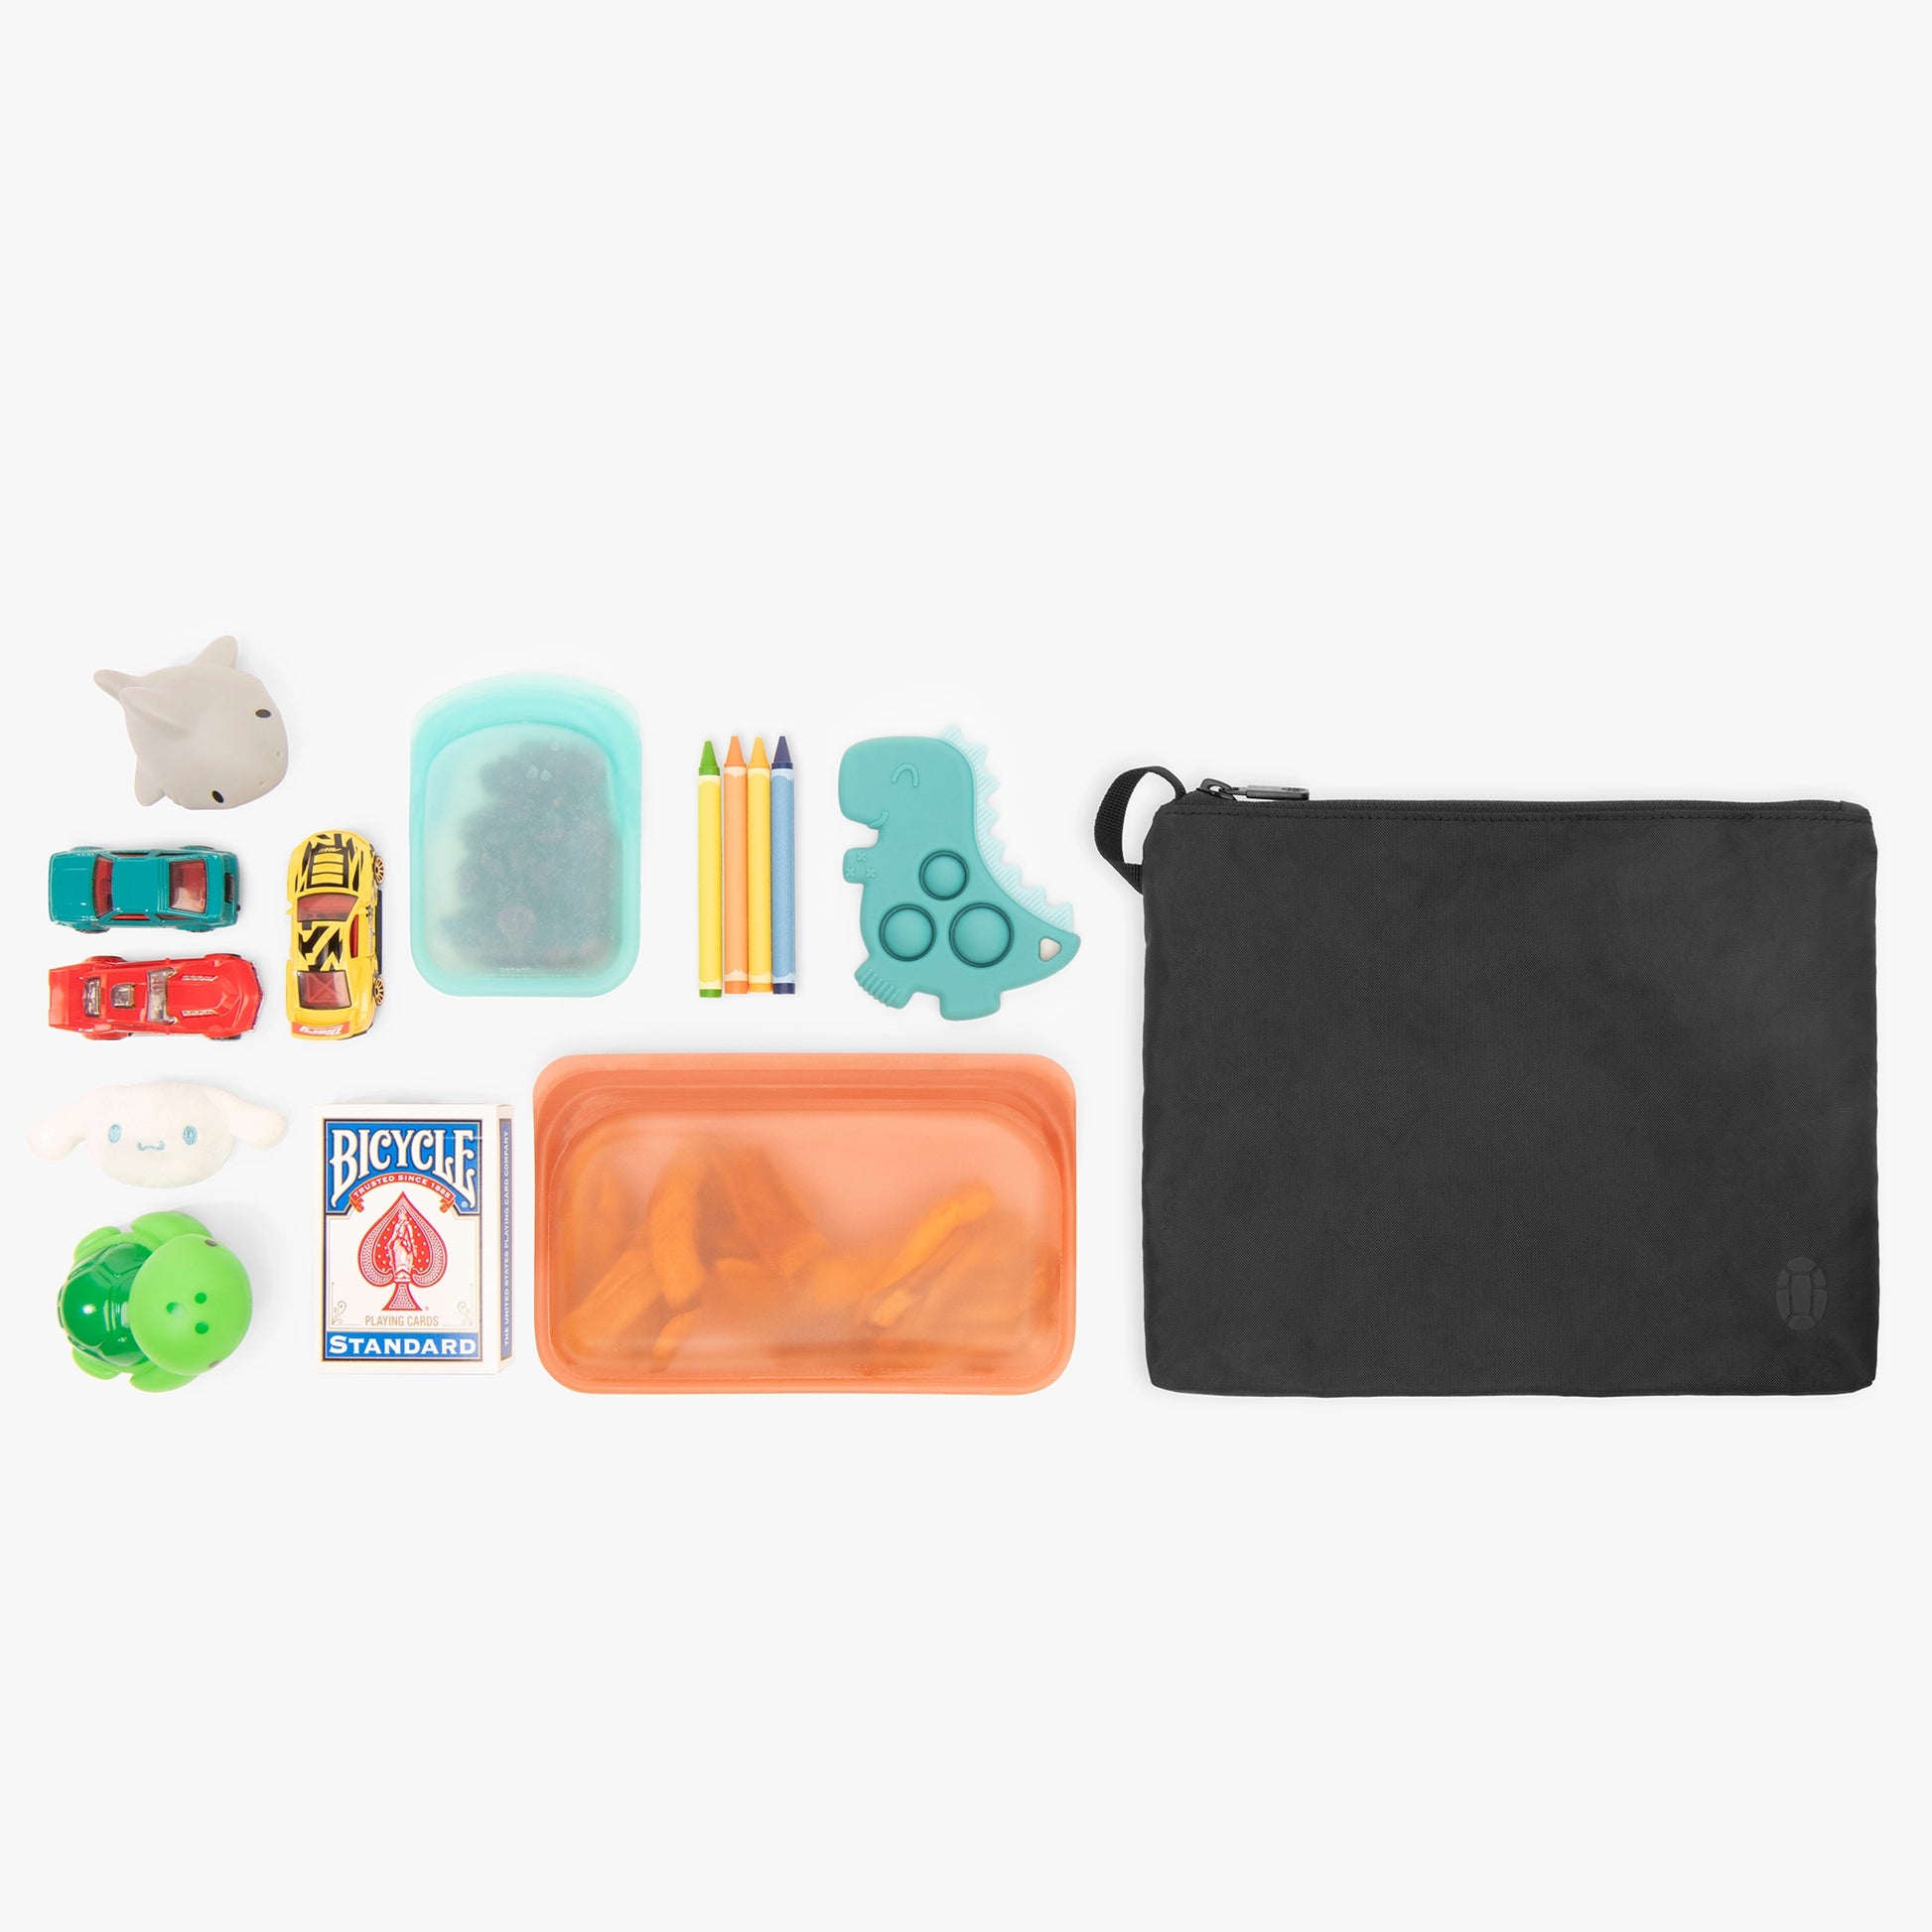 Kids' stuff in the large pouch